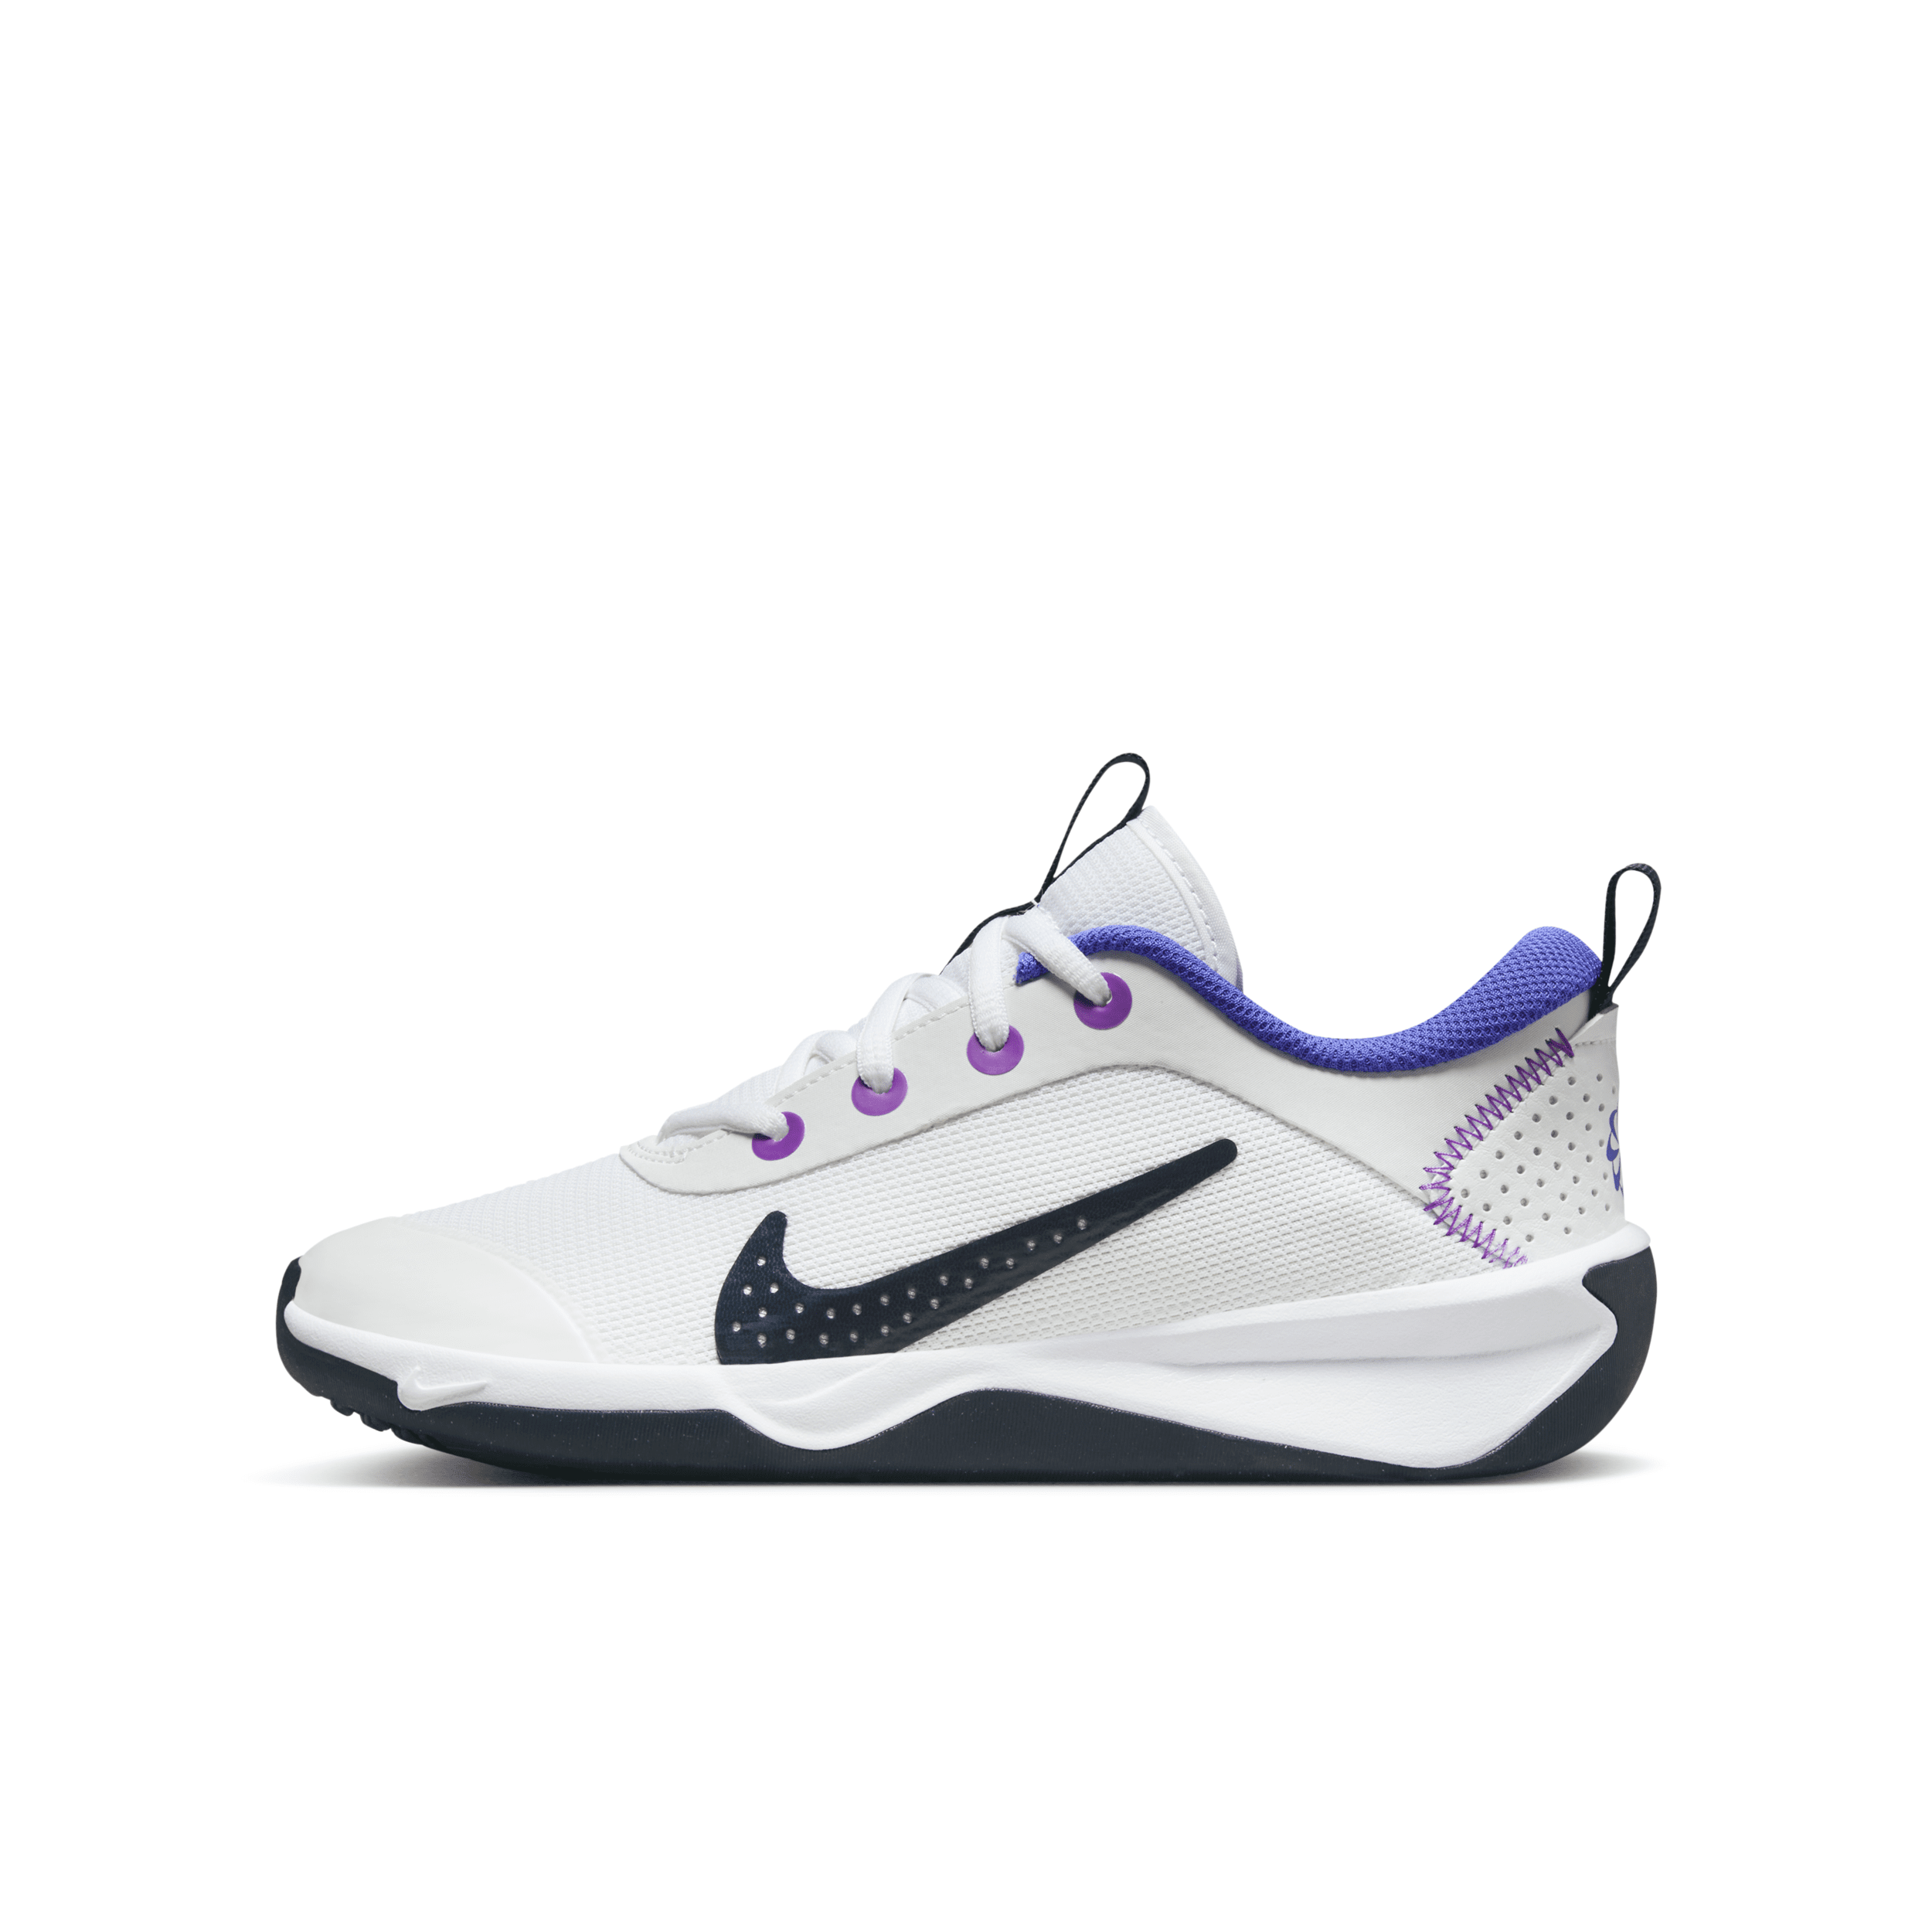 Nike Omni Multi-court Big Kids' Indoor Court Shoes In White